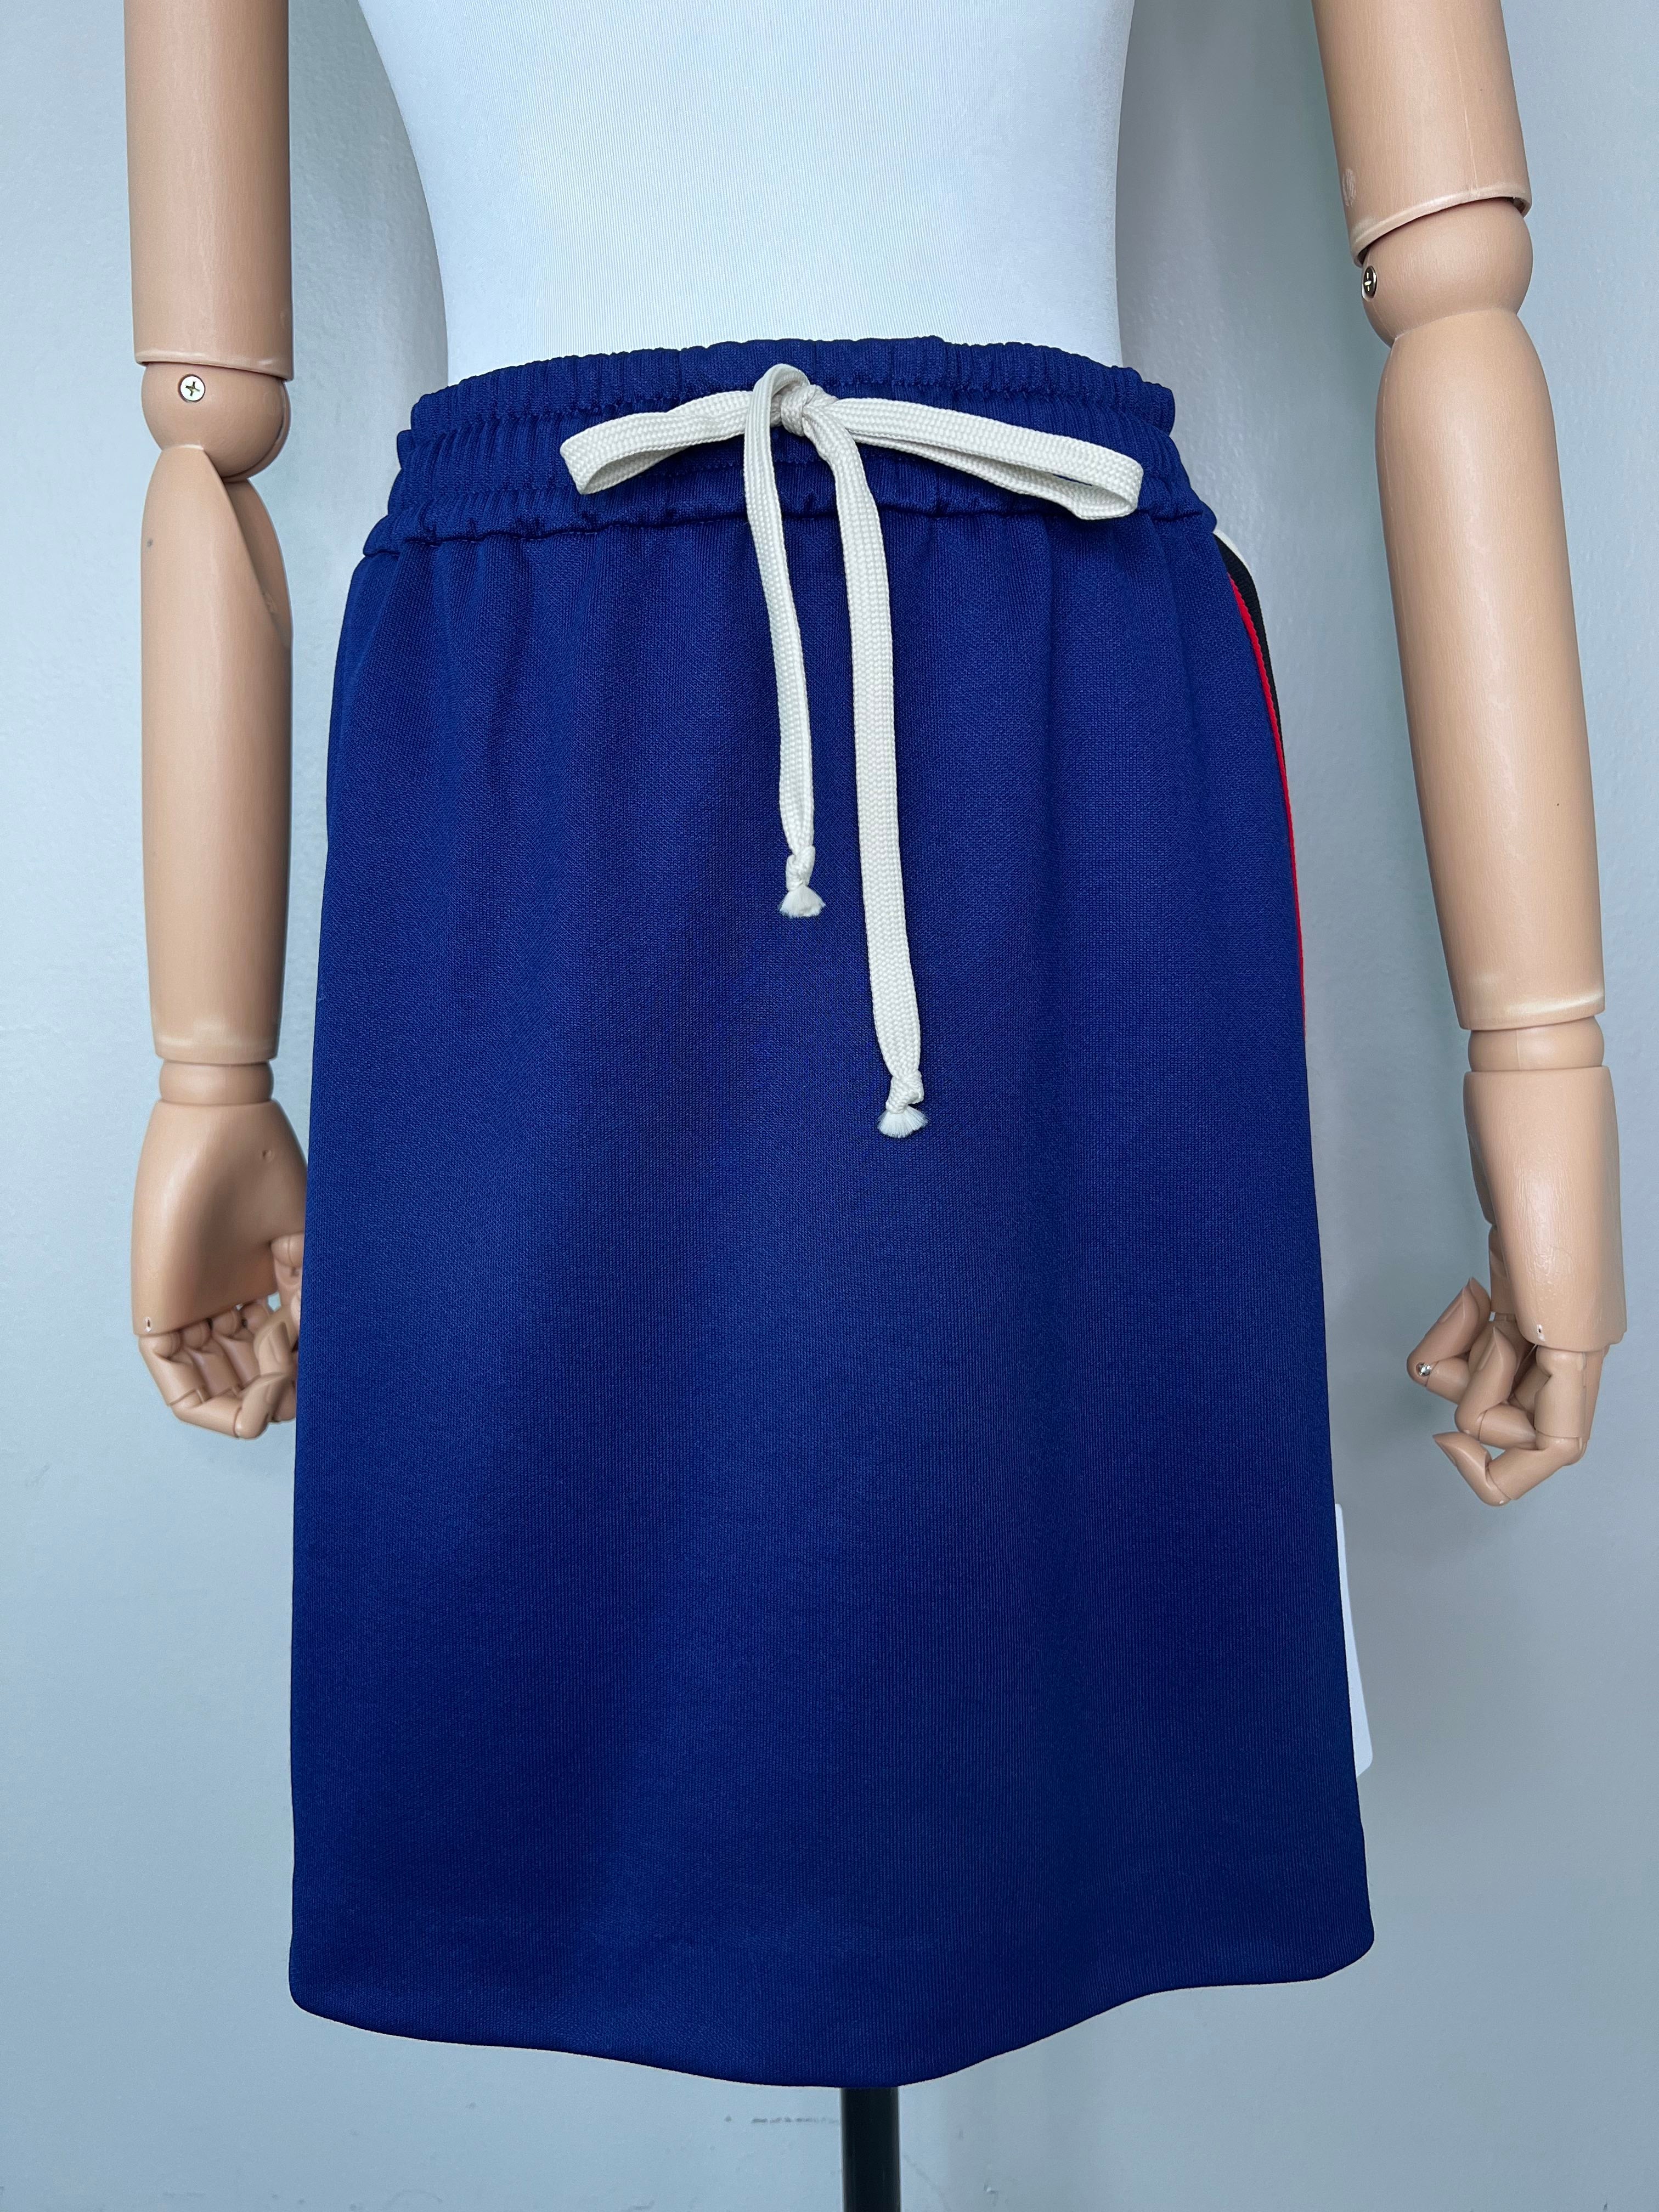 Brand new! short straight cut guccci skirt with GG logo stripes on sides.